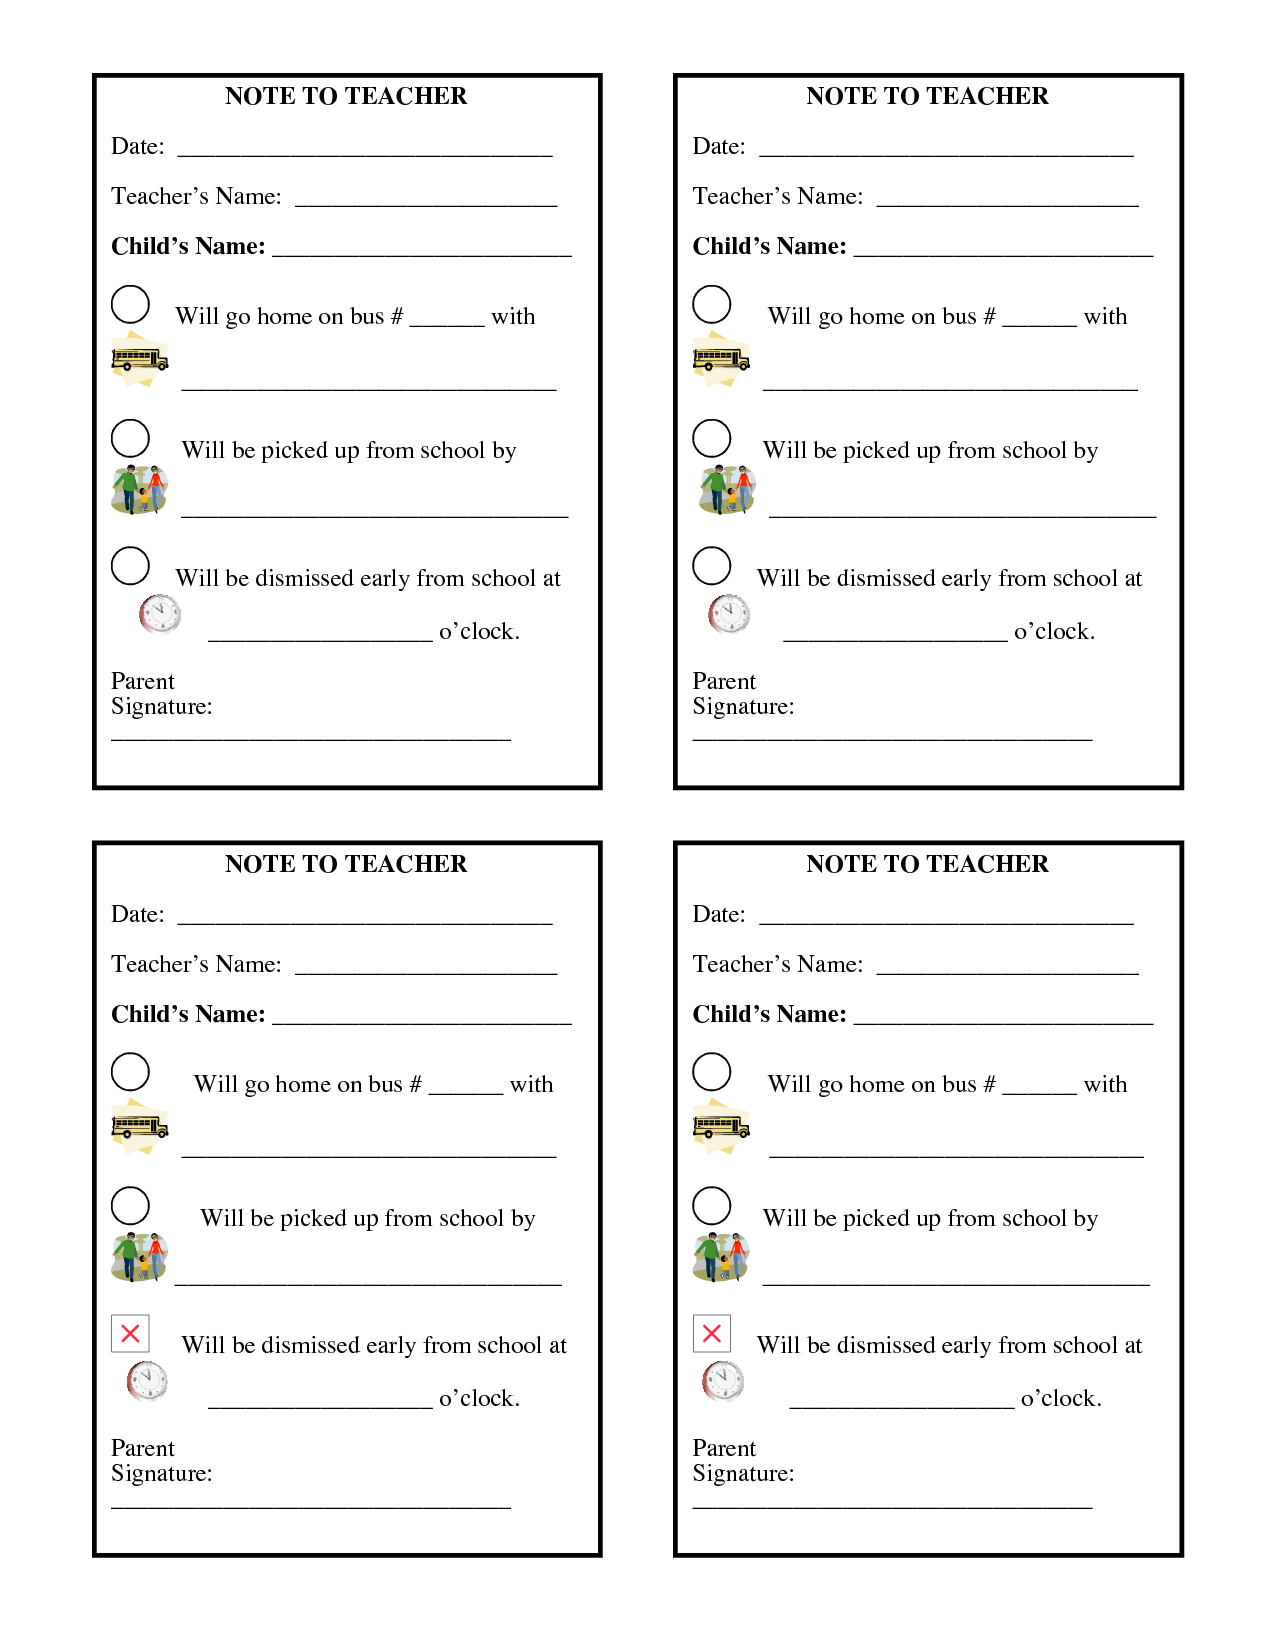 30 Images Of Conference Notes Template For Teachers | Bfegy - Free Printable Teacher Notes To Parents